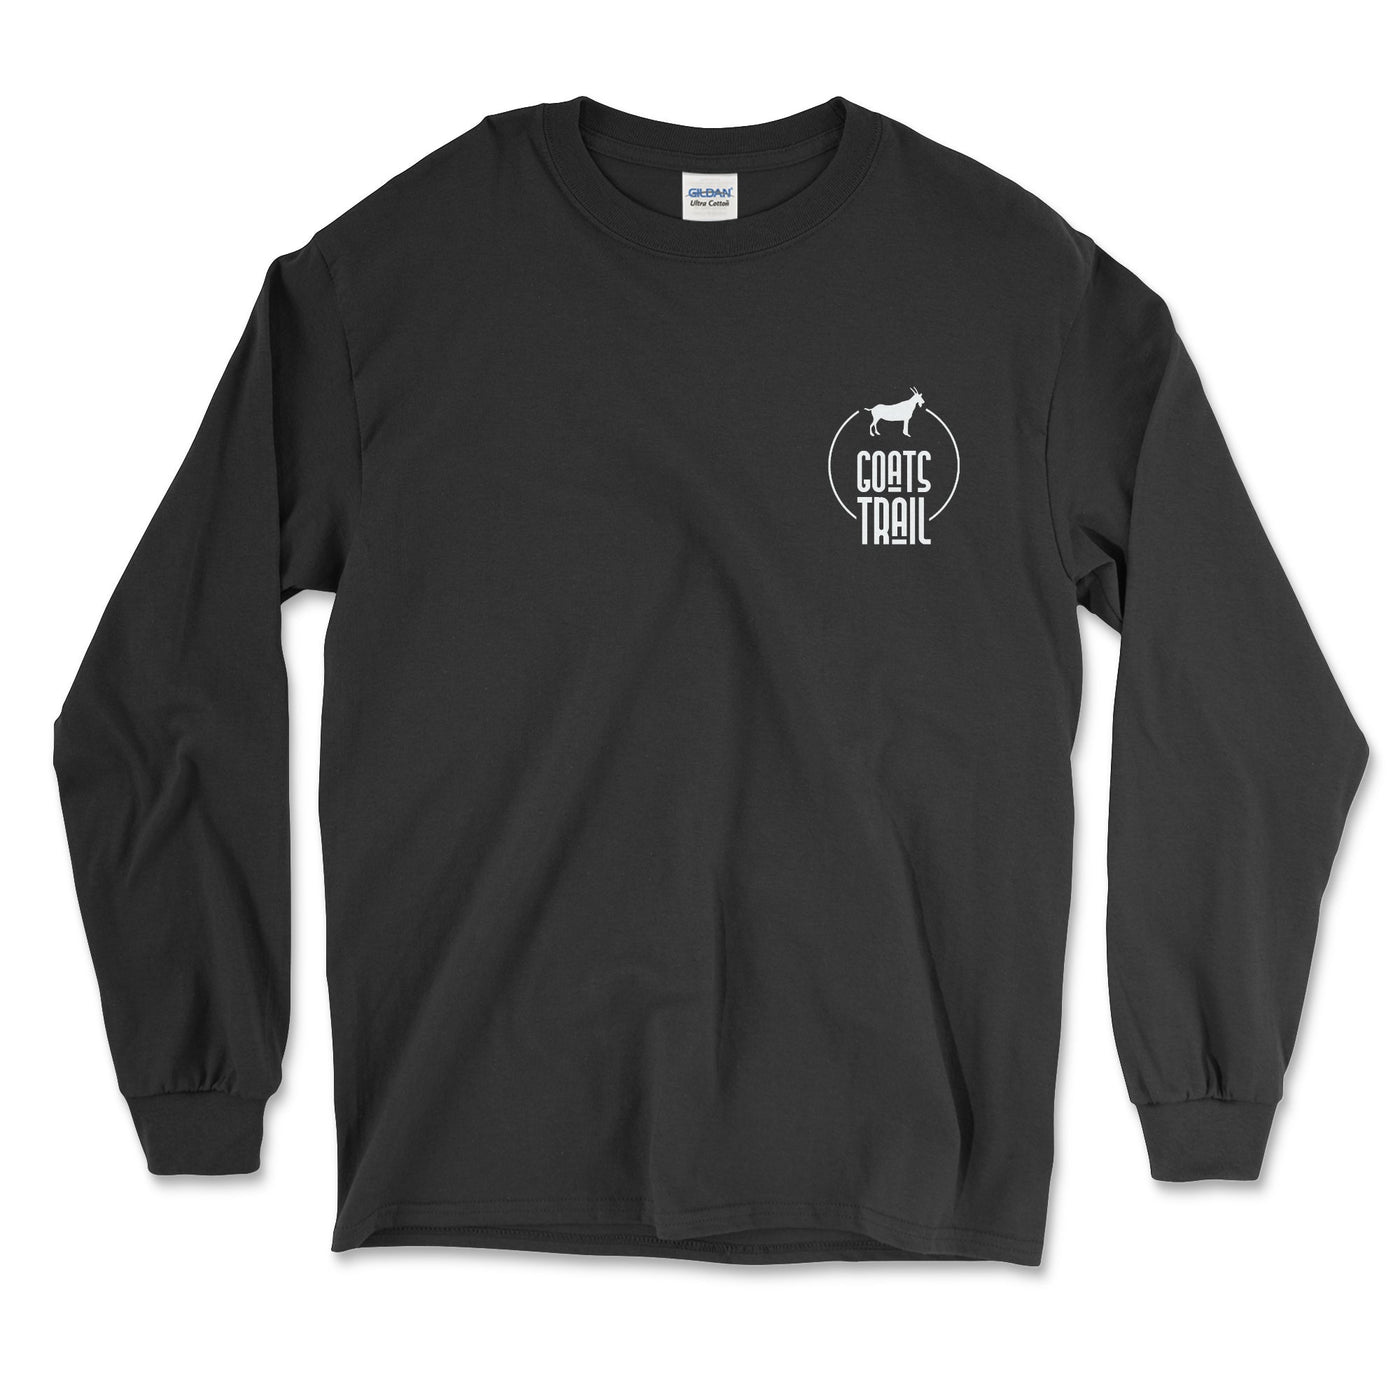 Lakefront Wanderlust Long-Sleeve Tee - Goats Trail Off-Road Apparel Company